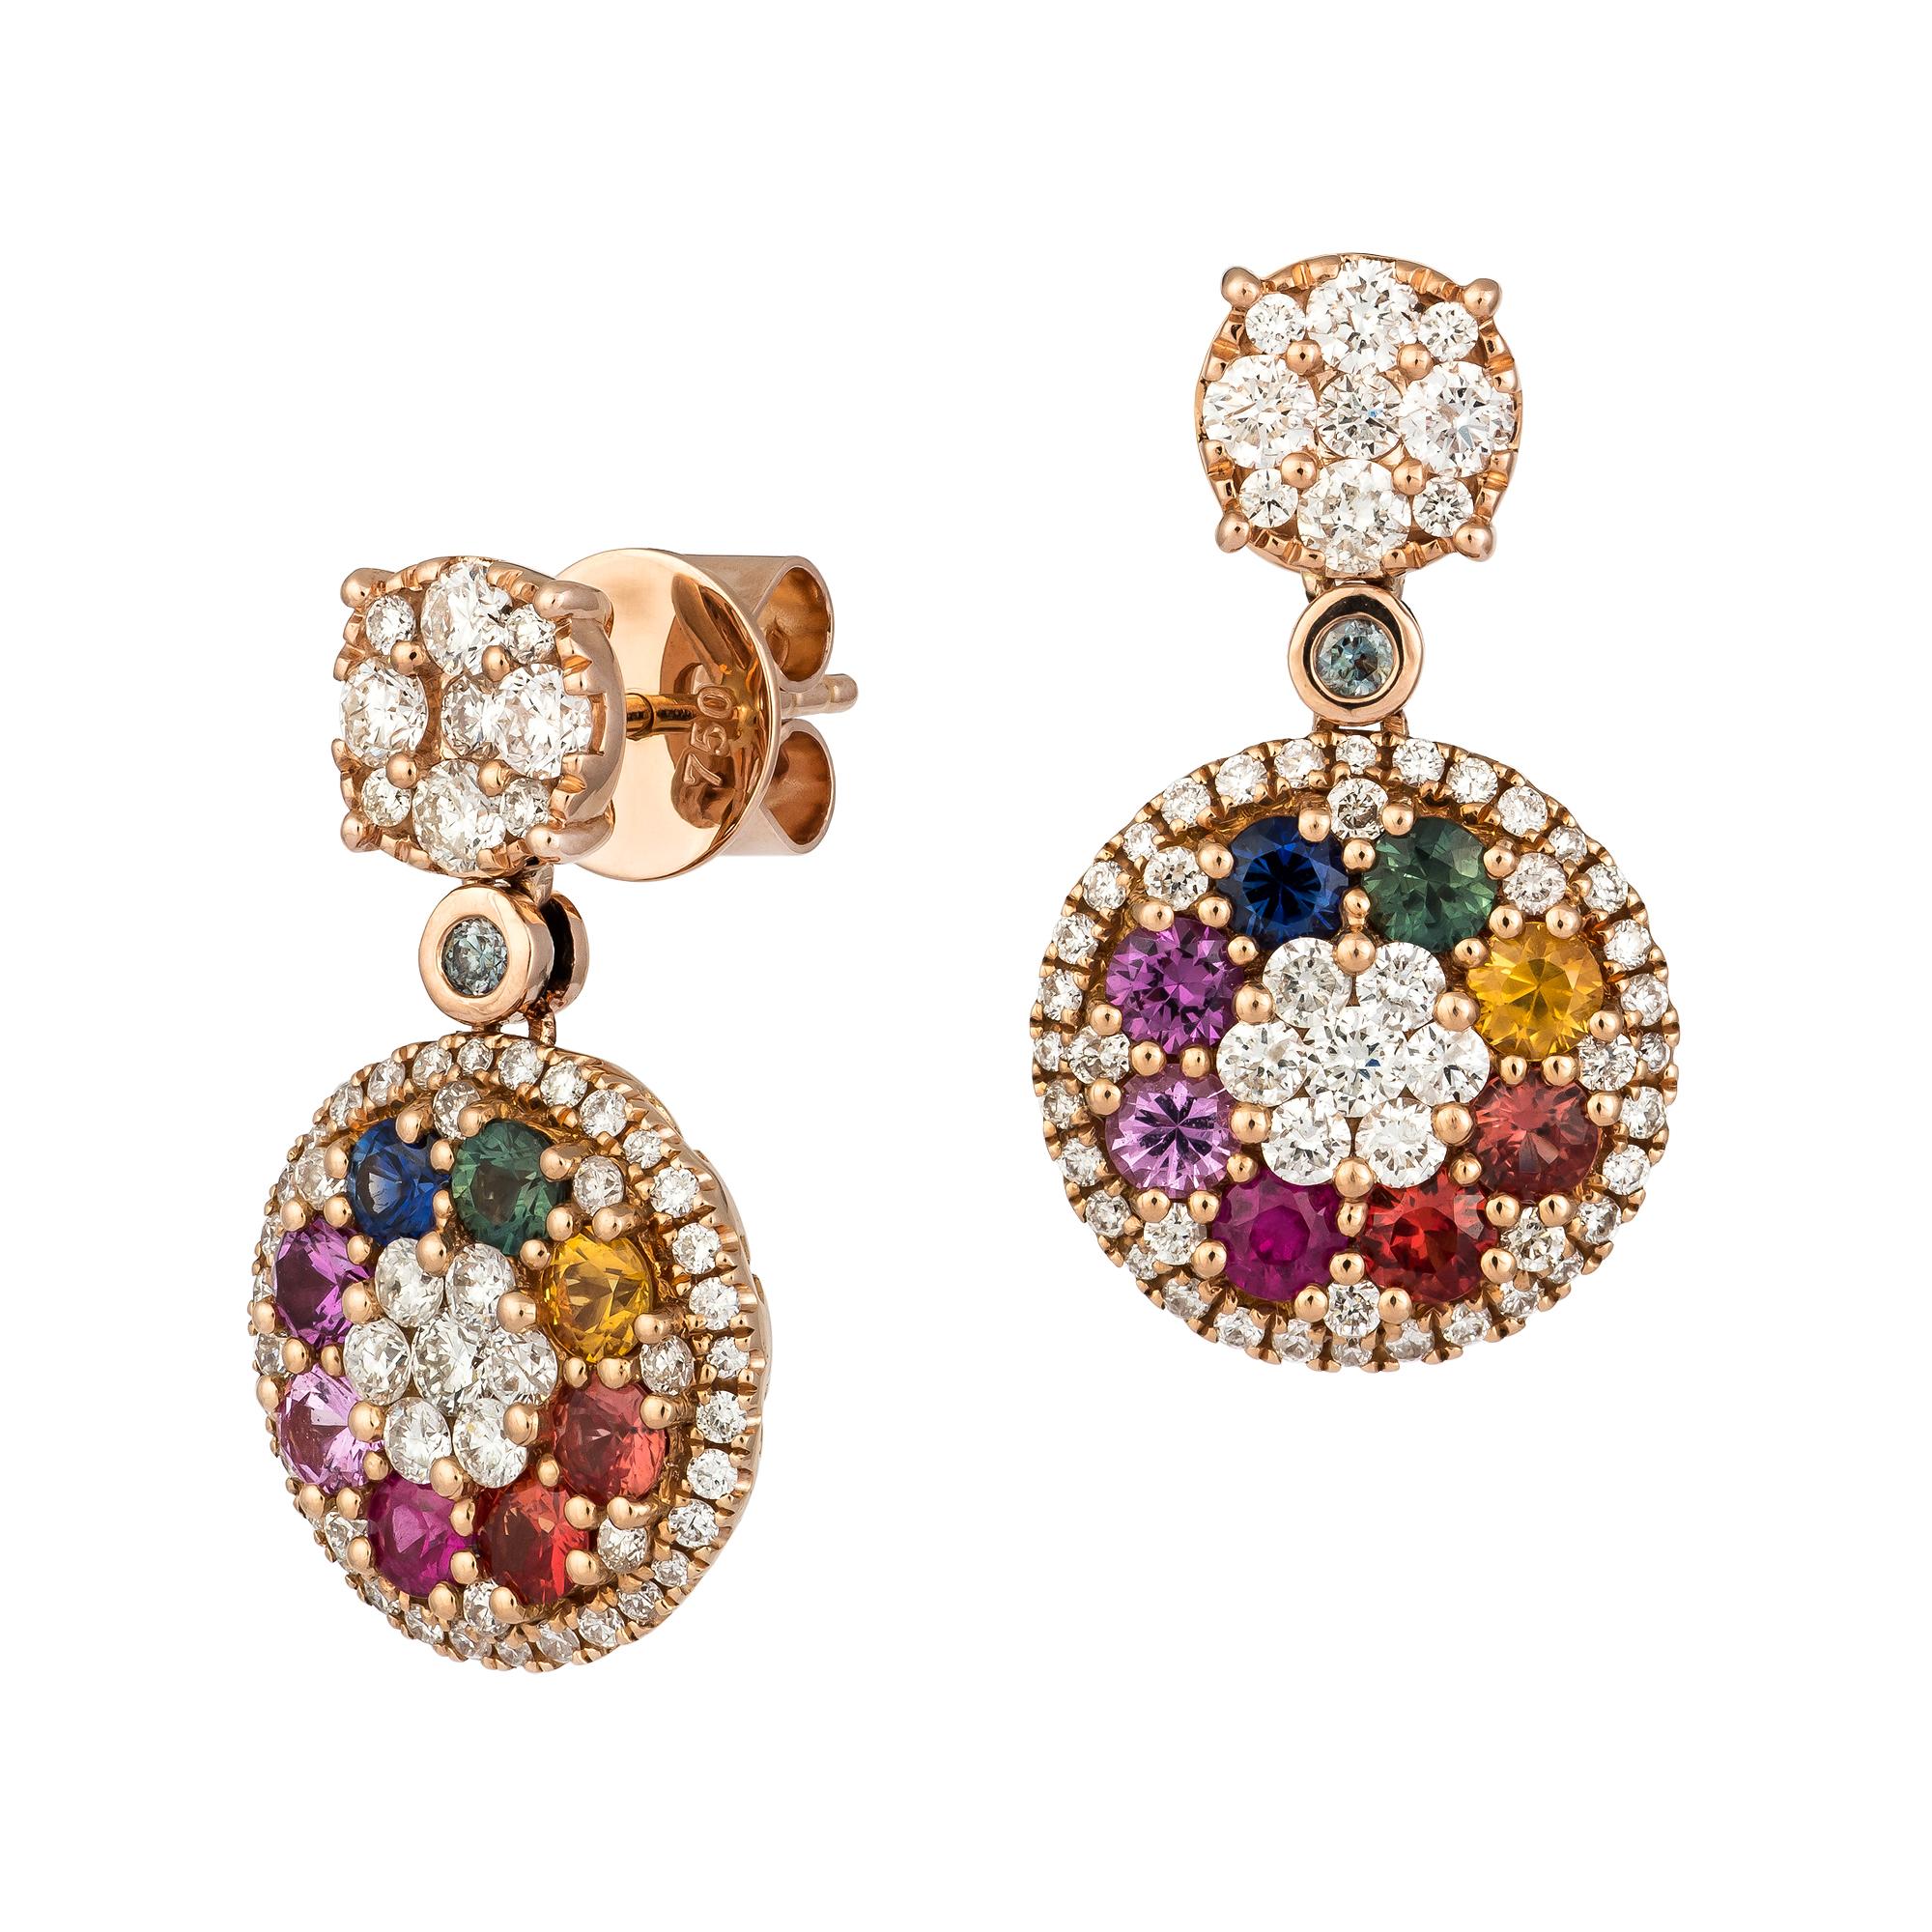 EARRINGS 18K Rose Gold
Diamond 1.50 Cts/114 Pieces
Multi Sapphire 1.77 Cts/16 Pieces

